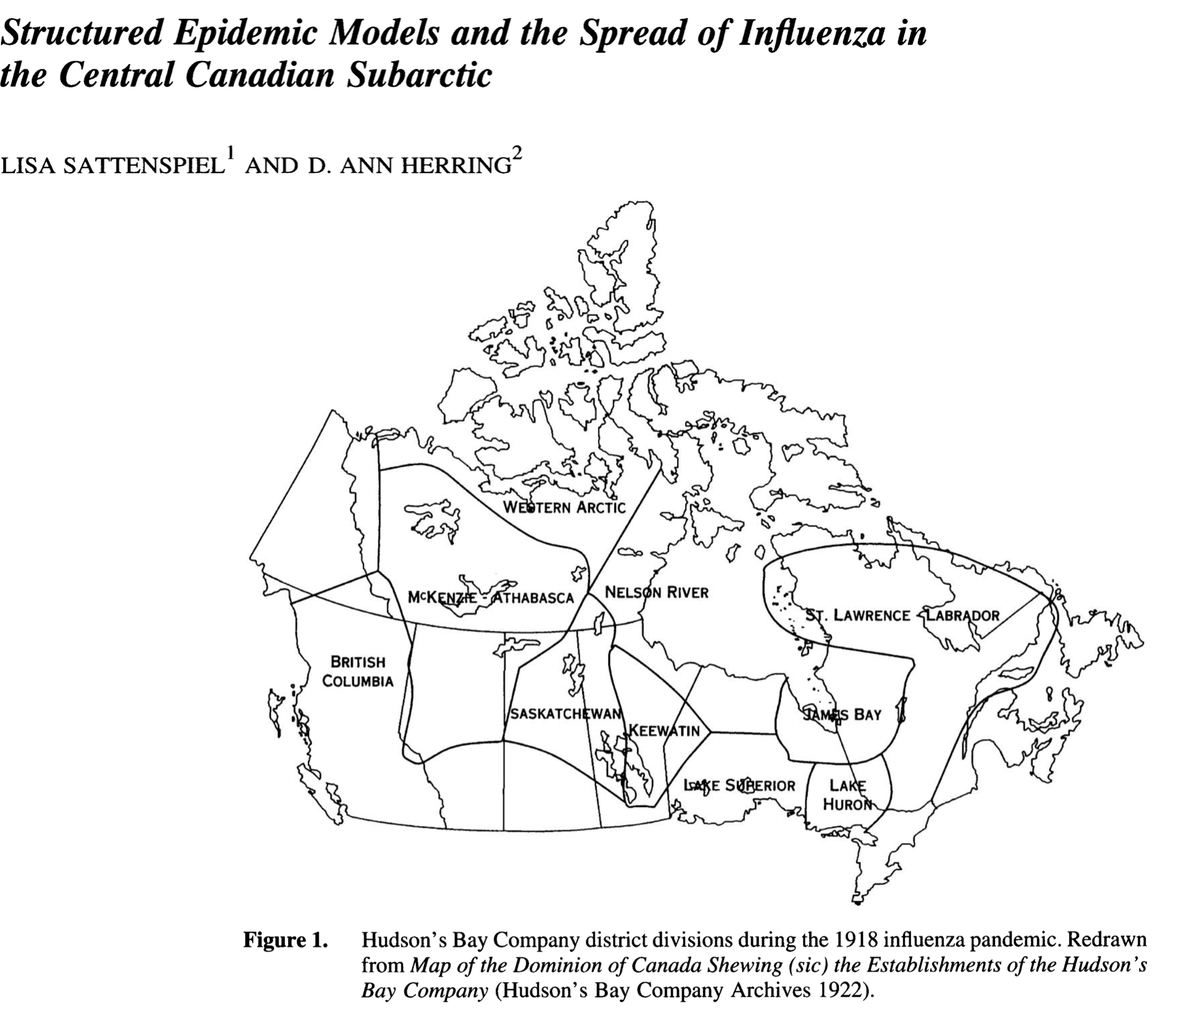 One of my favorite papers of all time (Sattenspiel & Herring 98) couples data from fur traders during the 1918 flu pandemic in Canada to meta-population models to show a similar effect of hierarchical structure on the shape of epidemic curves.  https://www.jstor.org/stable/41465622  5/15